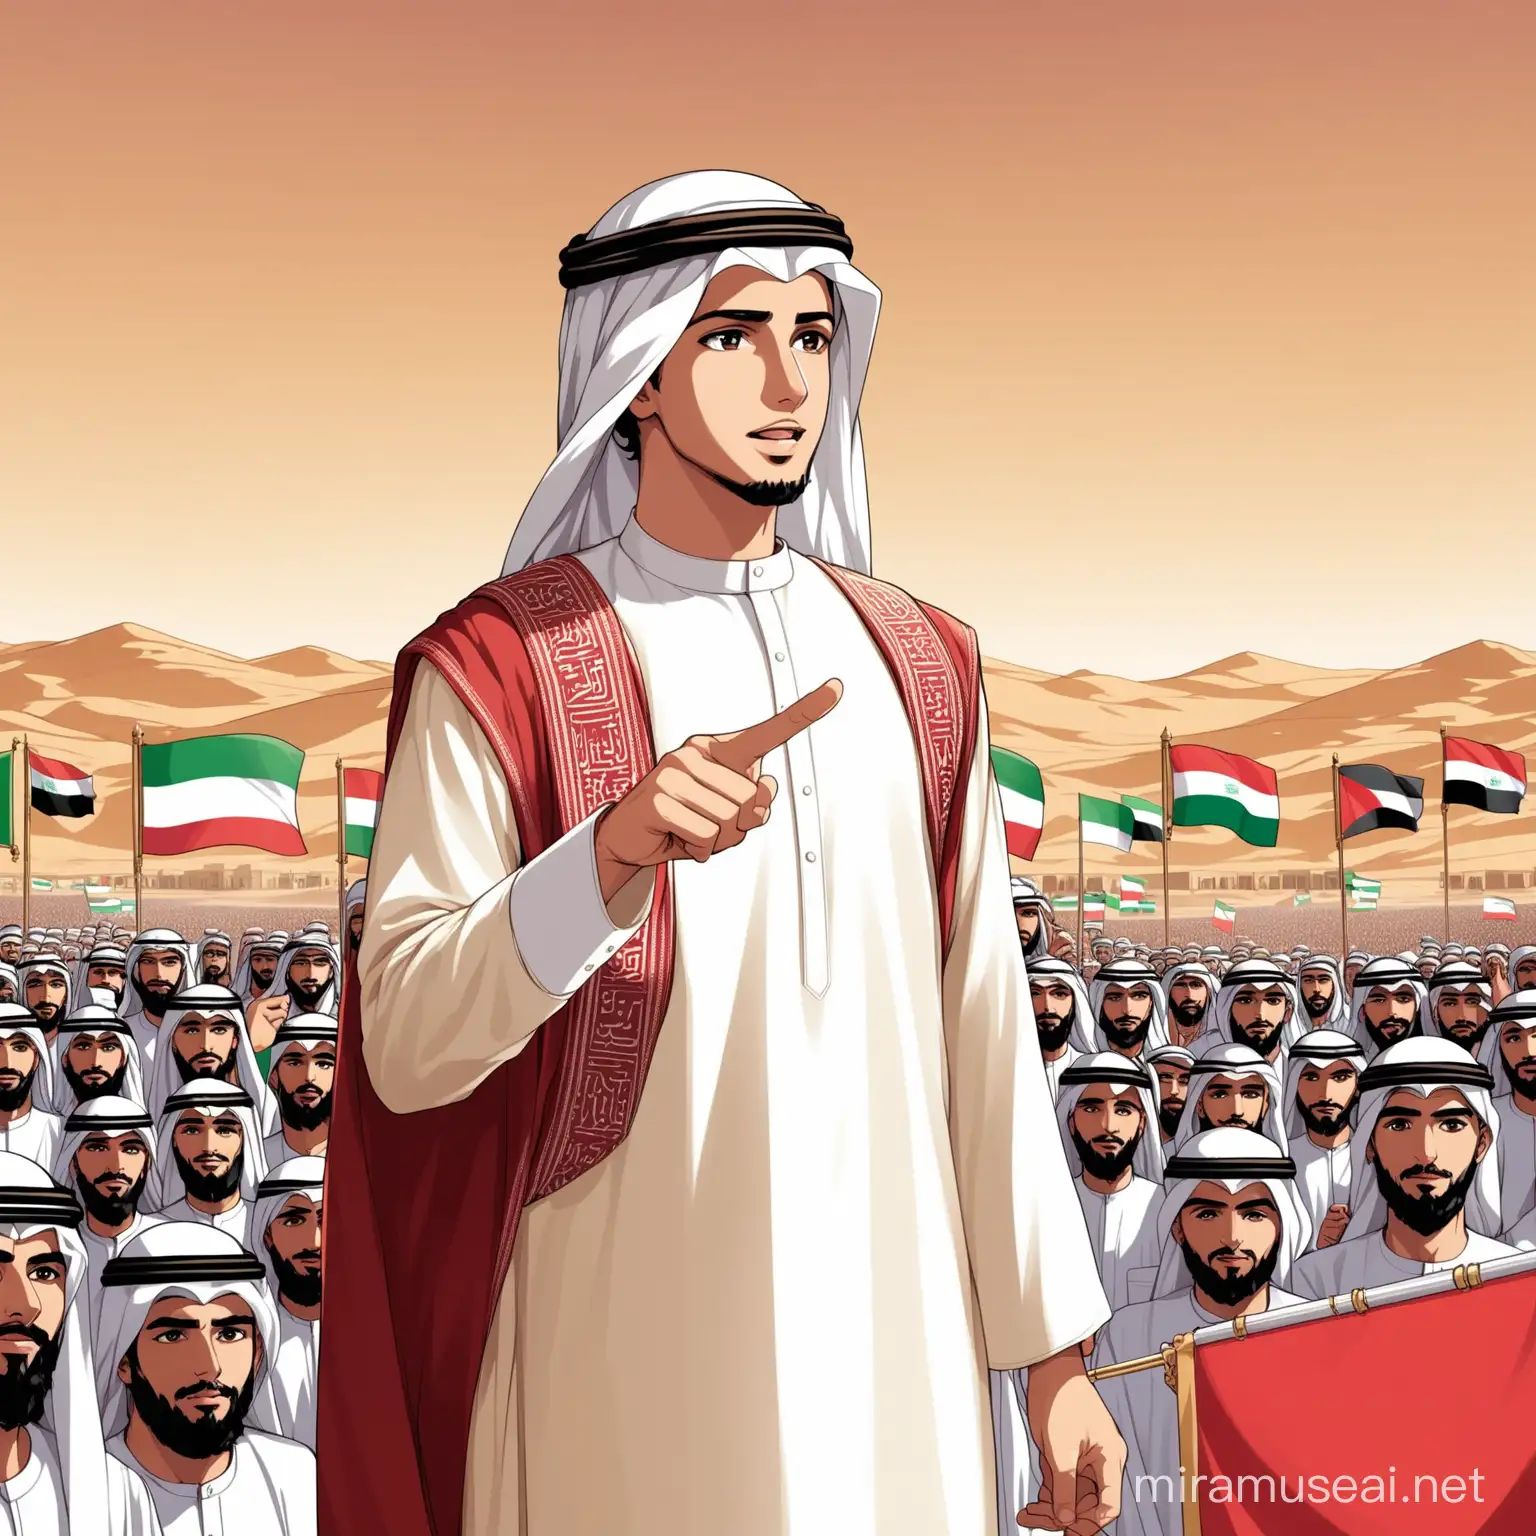 The background is desert.

A 20-year-old handsome man plays the role of leader. The clothes are Arab style and the top is red.

The leader gives a speech in front of many people.

Several Arab flags are erected.